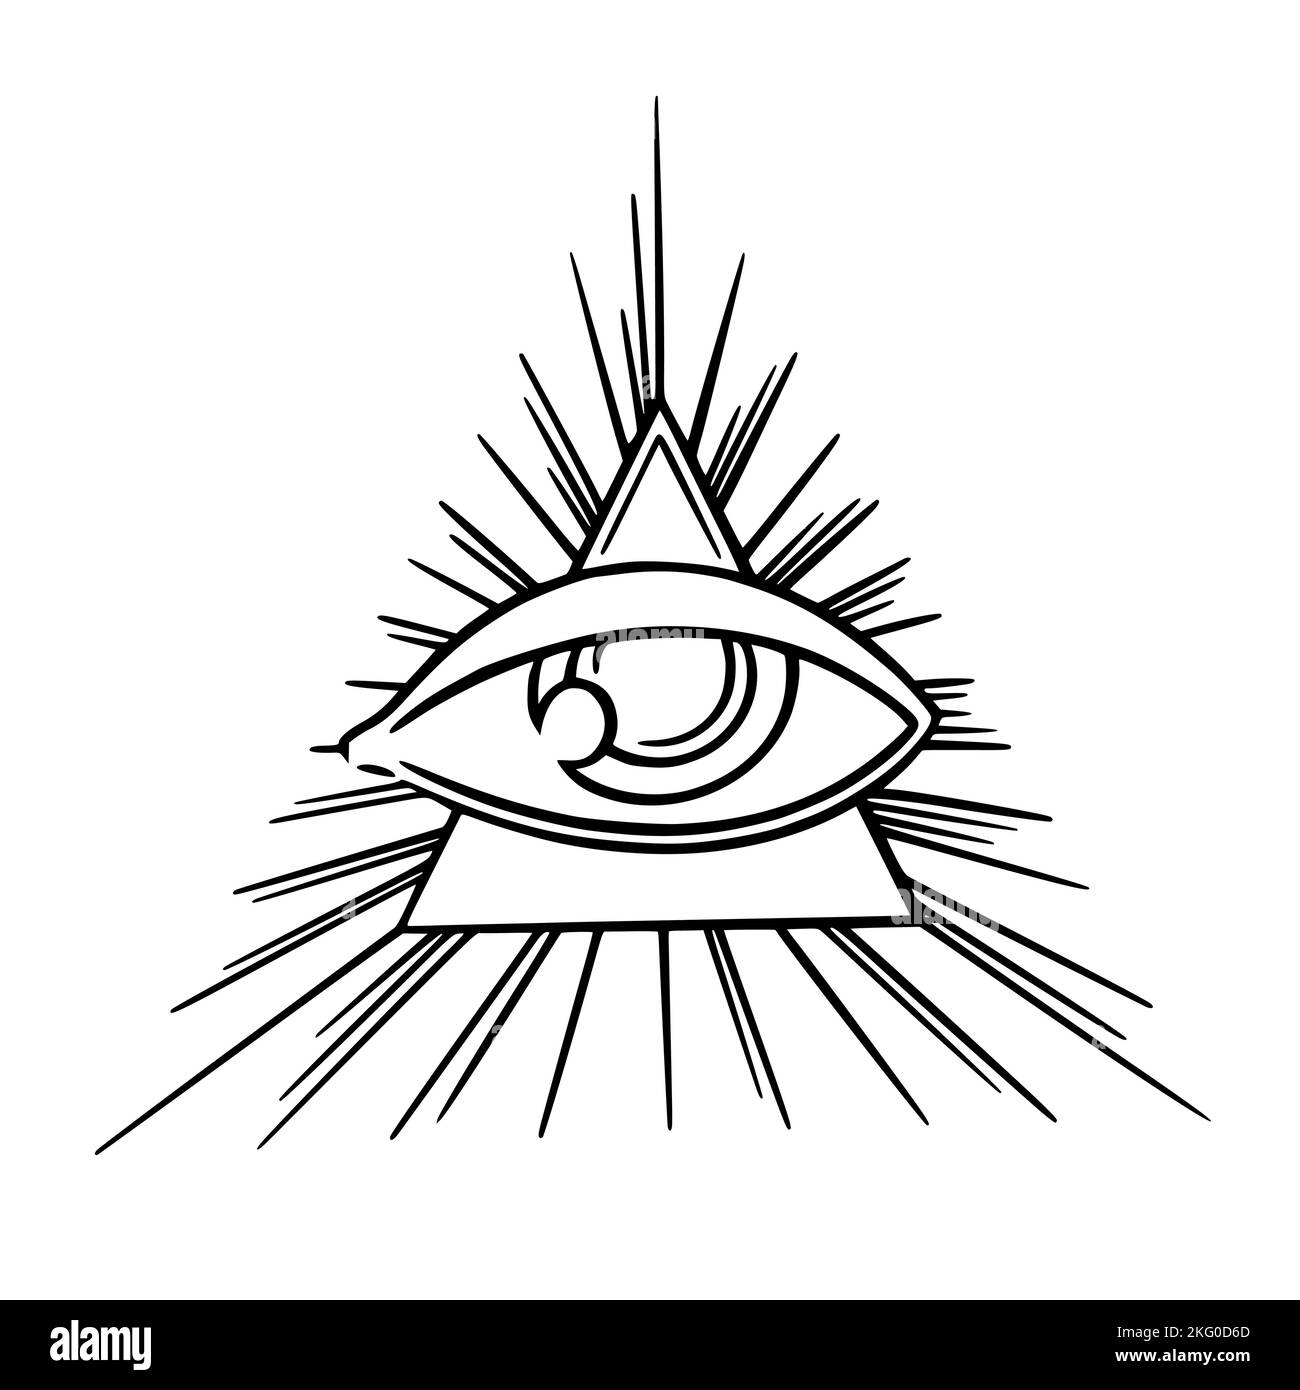 Illuminati eye of free mason secret society. Tarot all seeing third eye in triangle with rays. Vector illustration isolated in white background Stock Vector